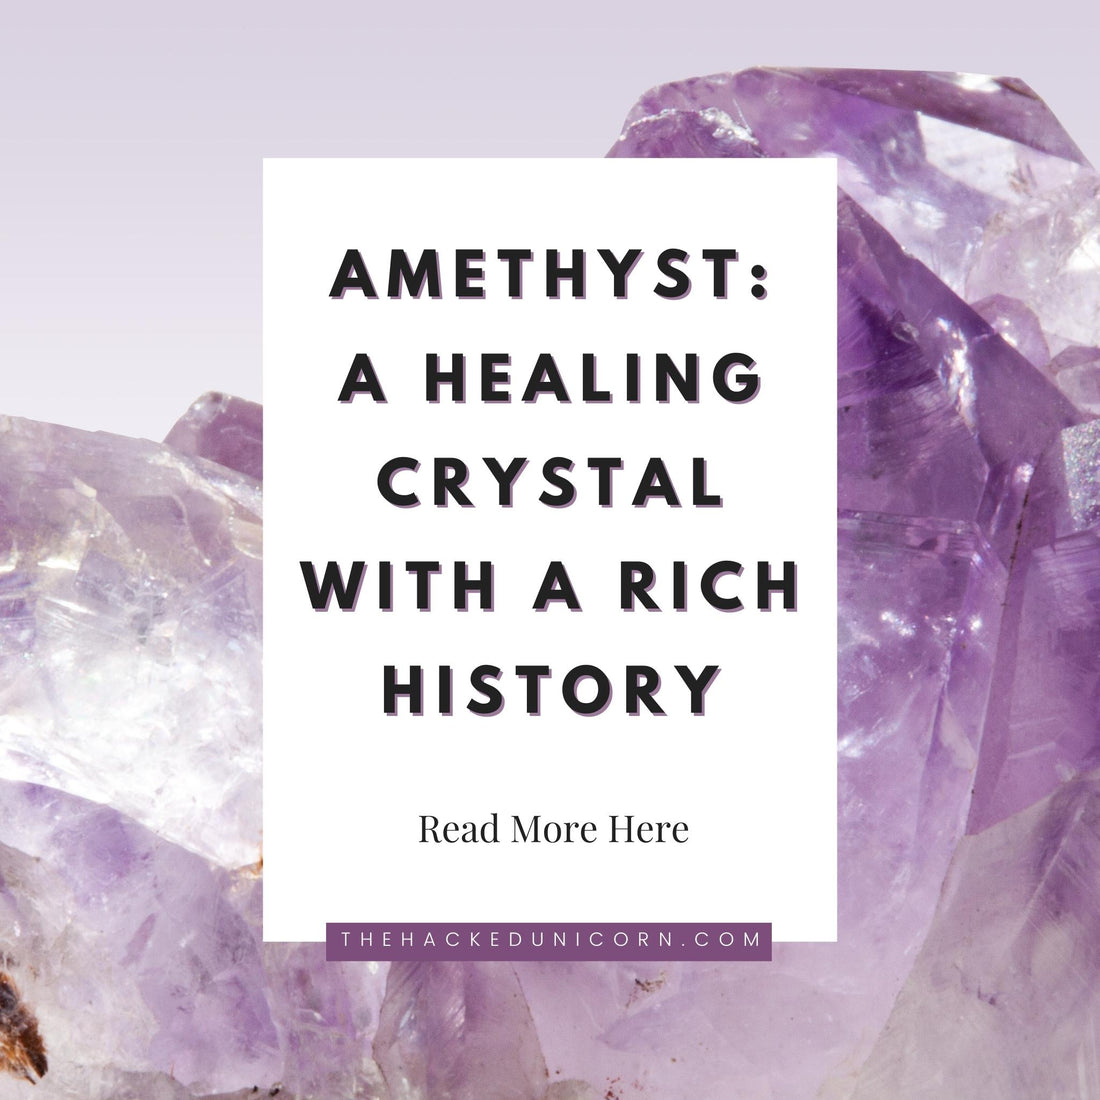 Amethyst - A Healing Crystal with a Rich History